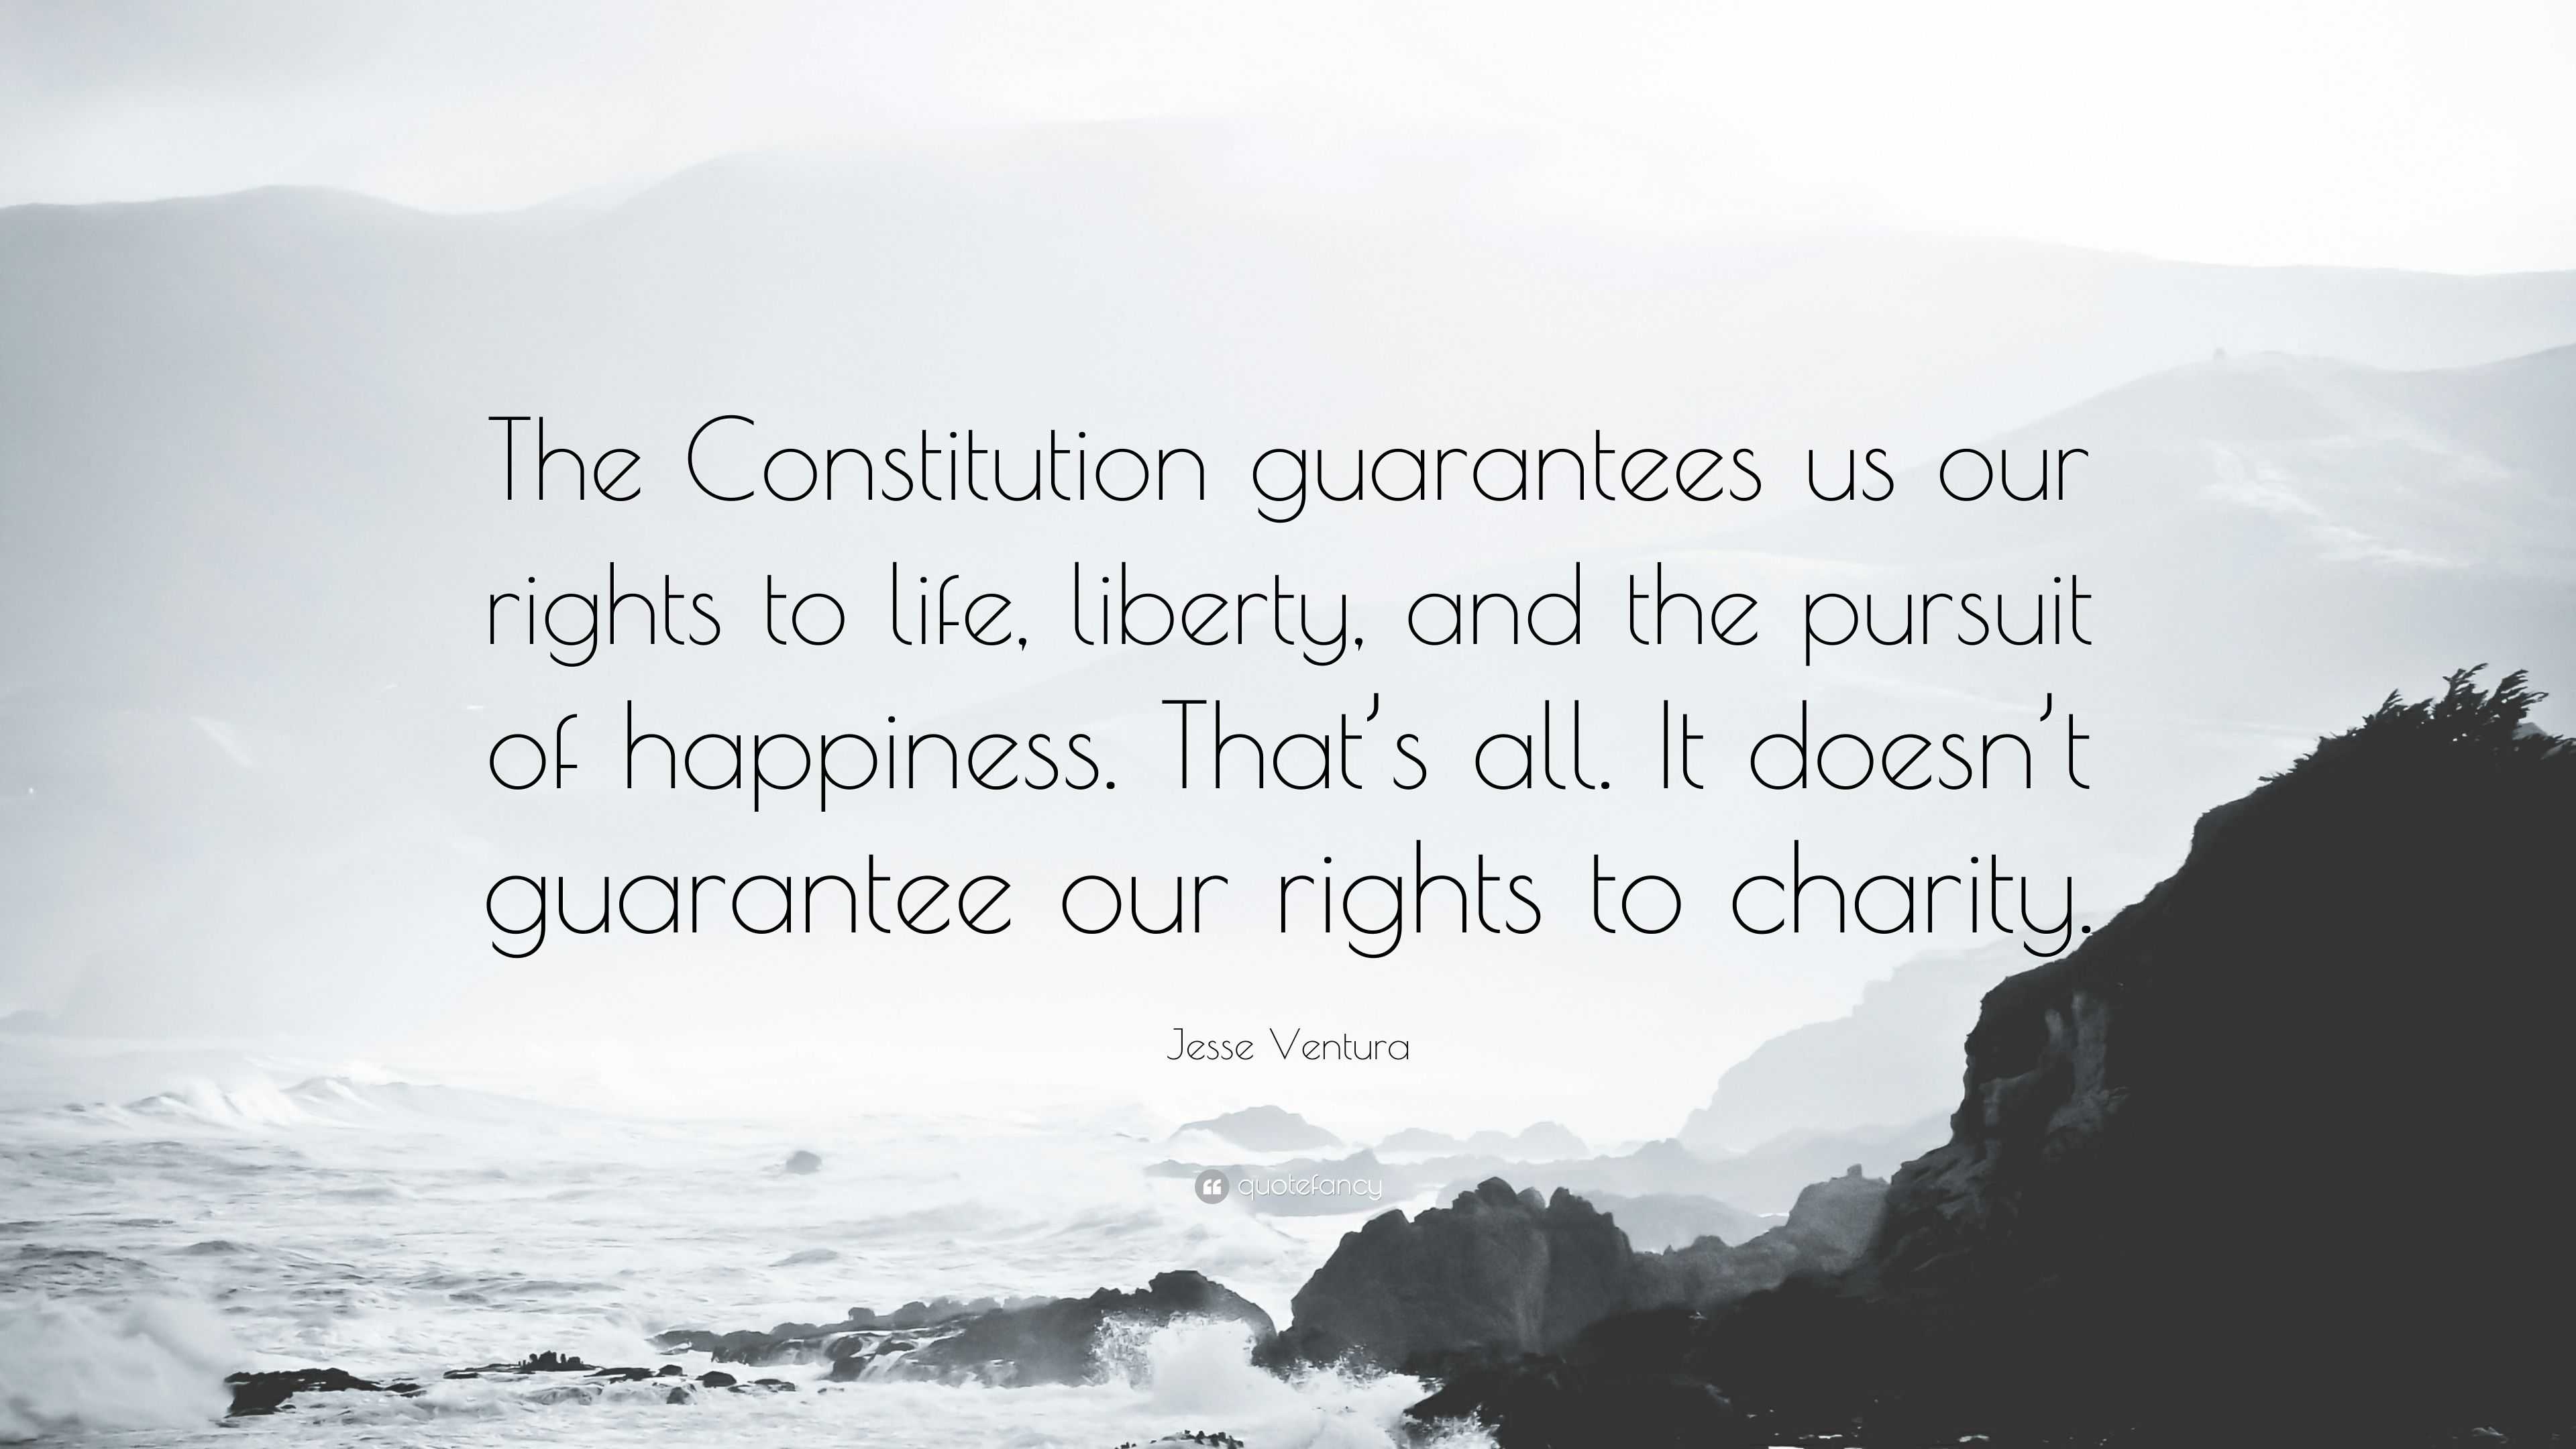 Does the U.S. Constitution Guarantee A Right To Life?